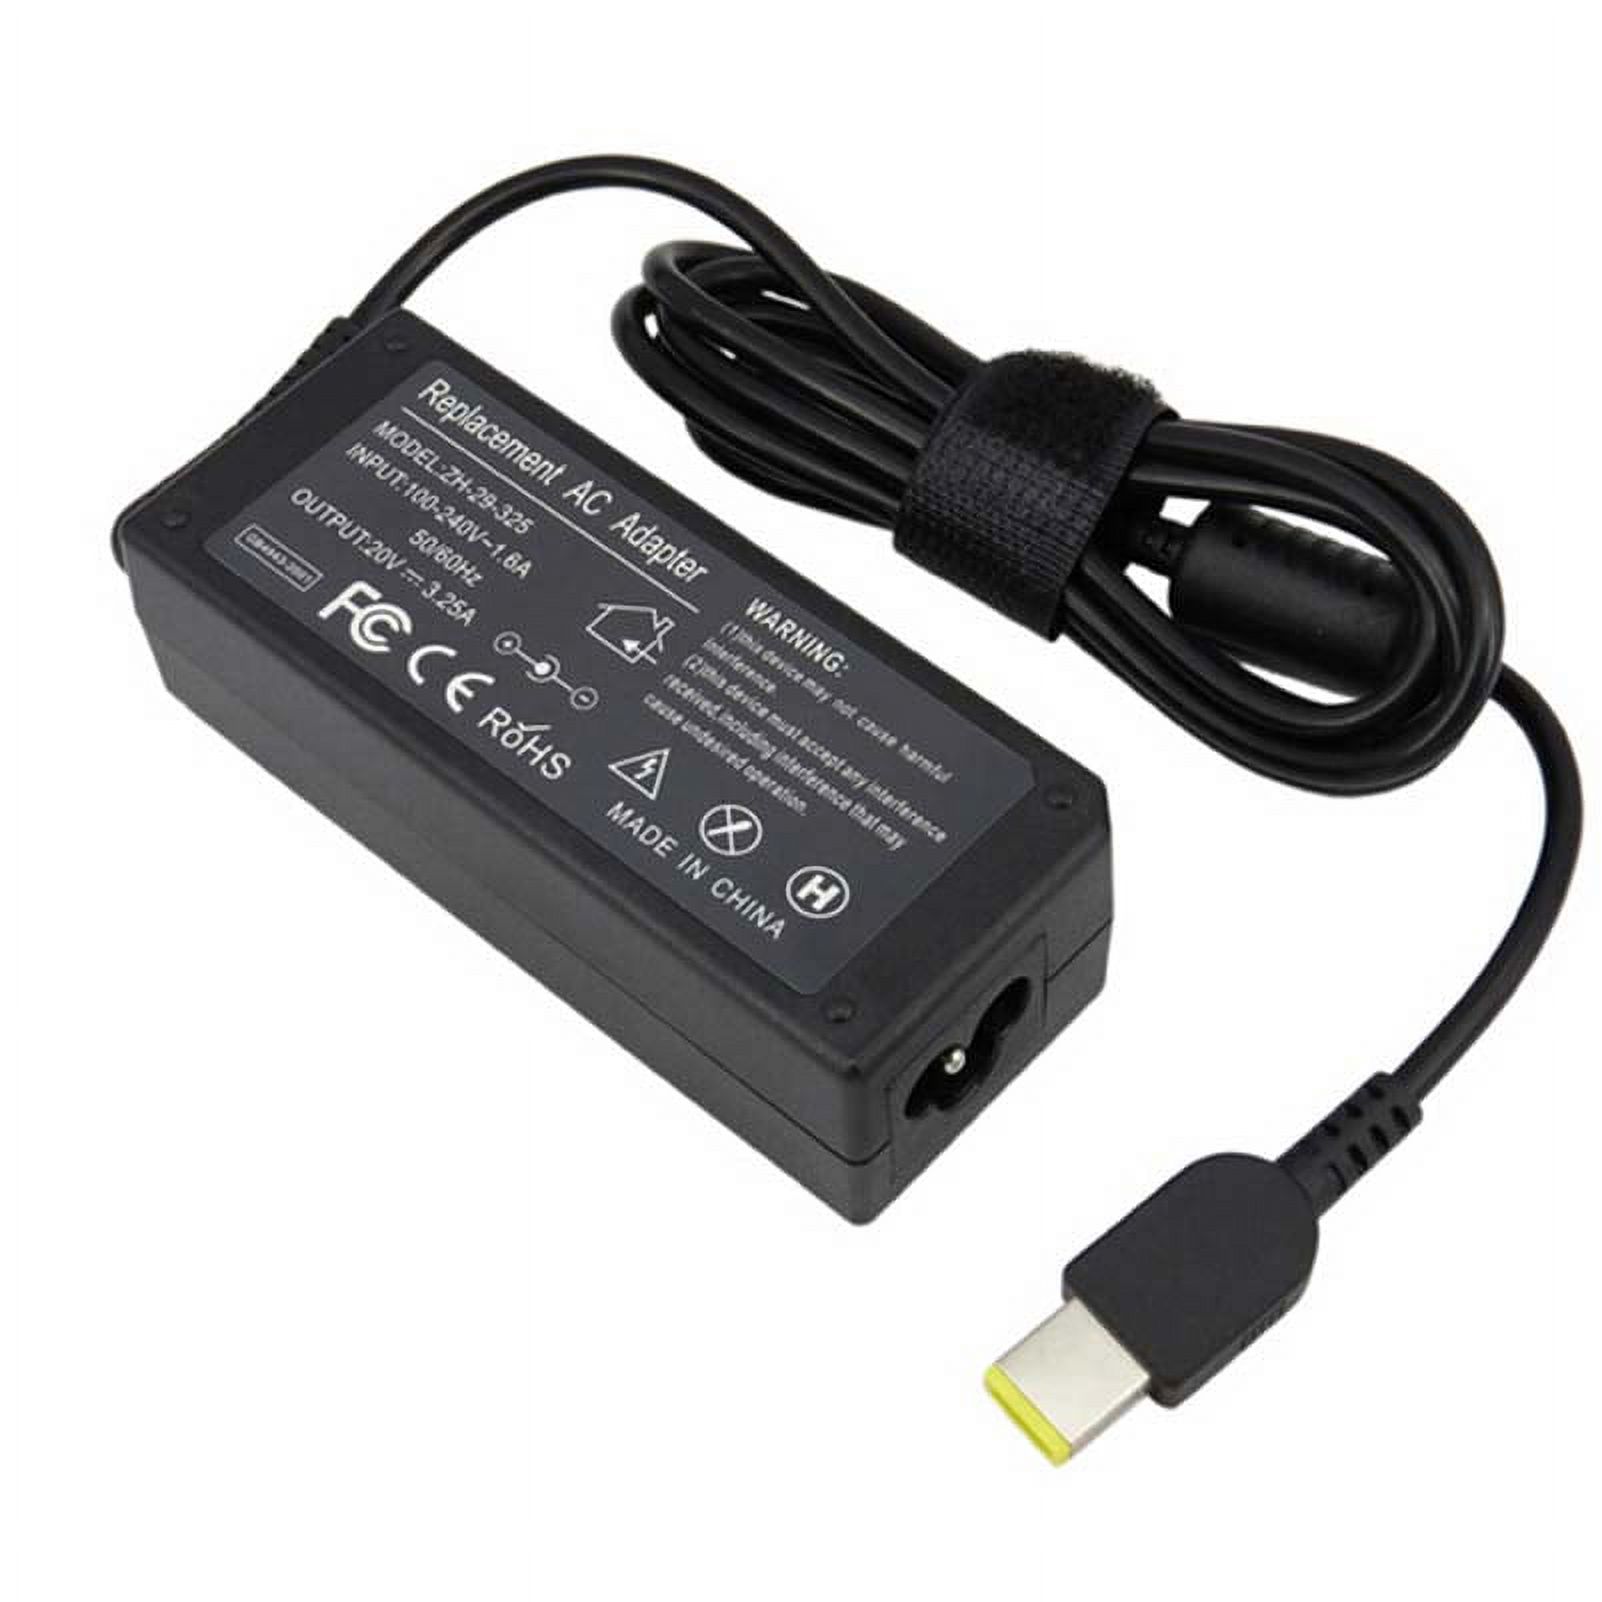 AC Adapter Charger replacement for Lenovo 0C19868 ADP-65FD B; PA-1650-72; Lenovo PA-1650-37LC; PA-1650-72 PA-1650-37LC; Lenvo IdeaPad Yoga 13 Series; 13-2191; 13 2191-2XU - image 1 of 4